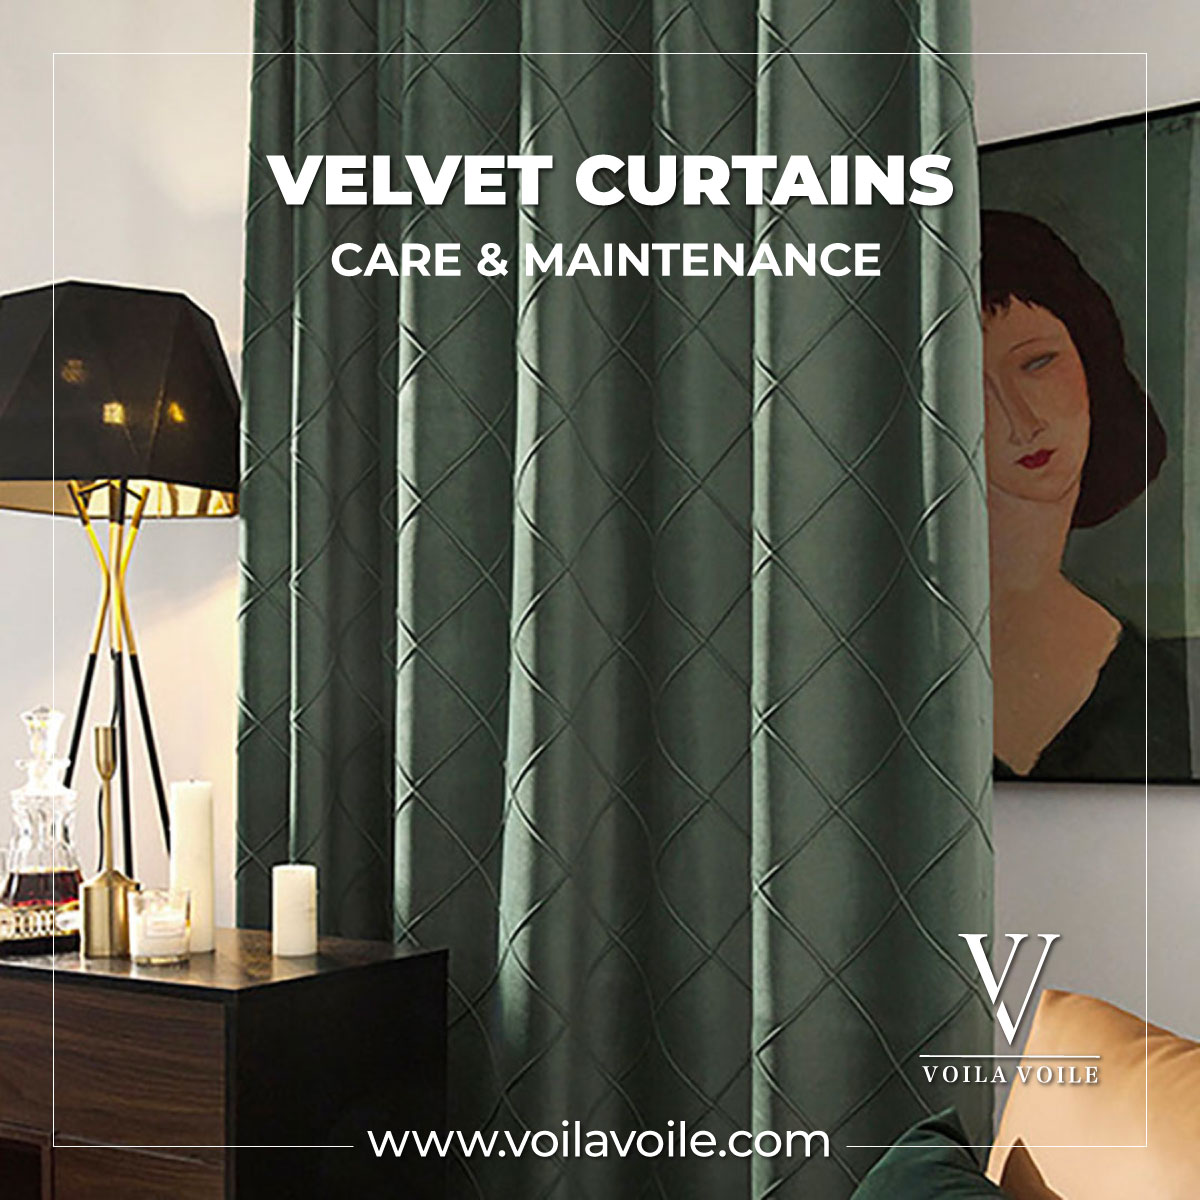 Velvet Curtain Care & Maintenance: A Step-by-Step Cleaning Guide